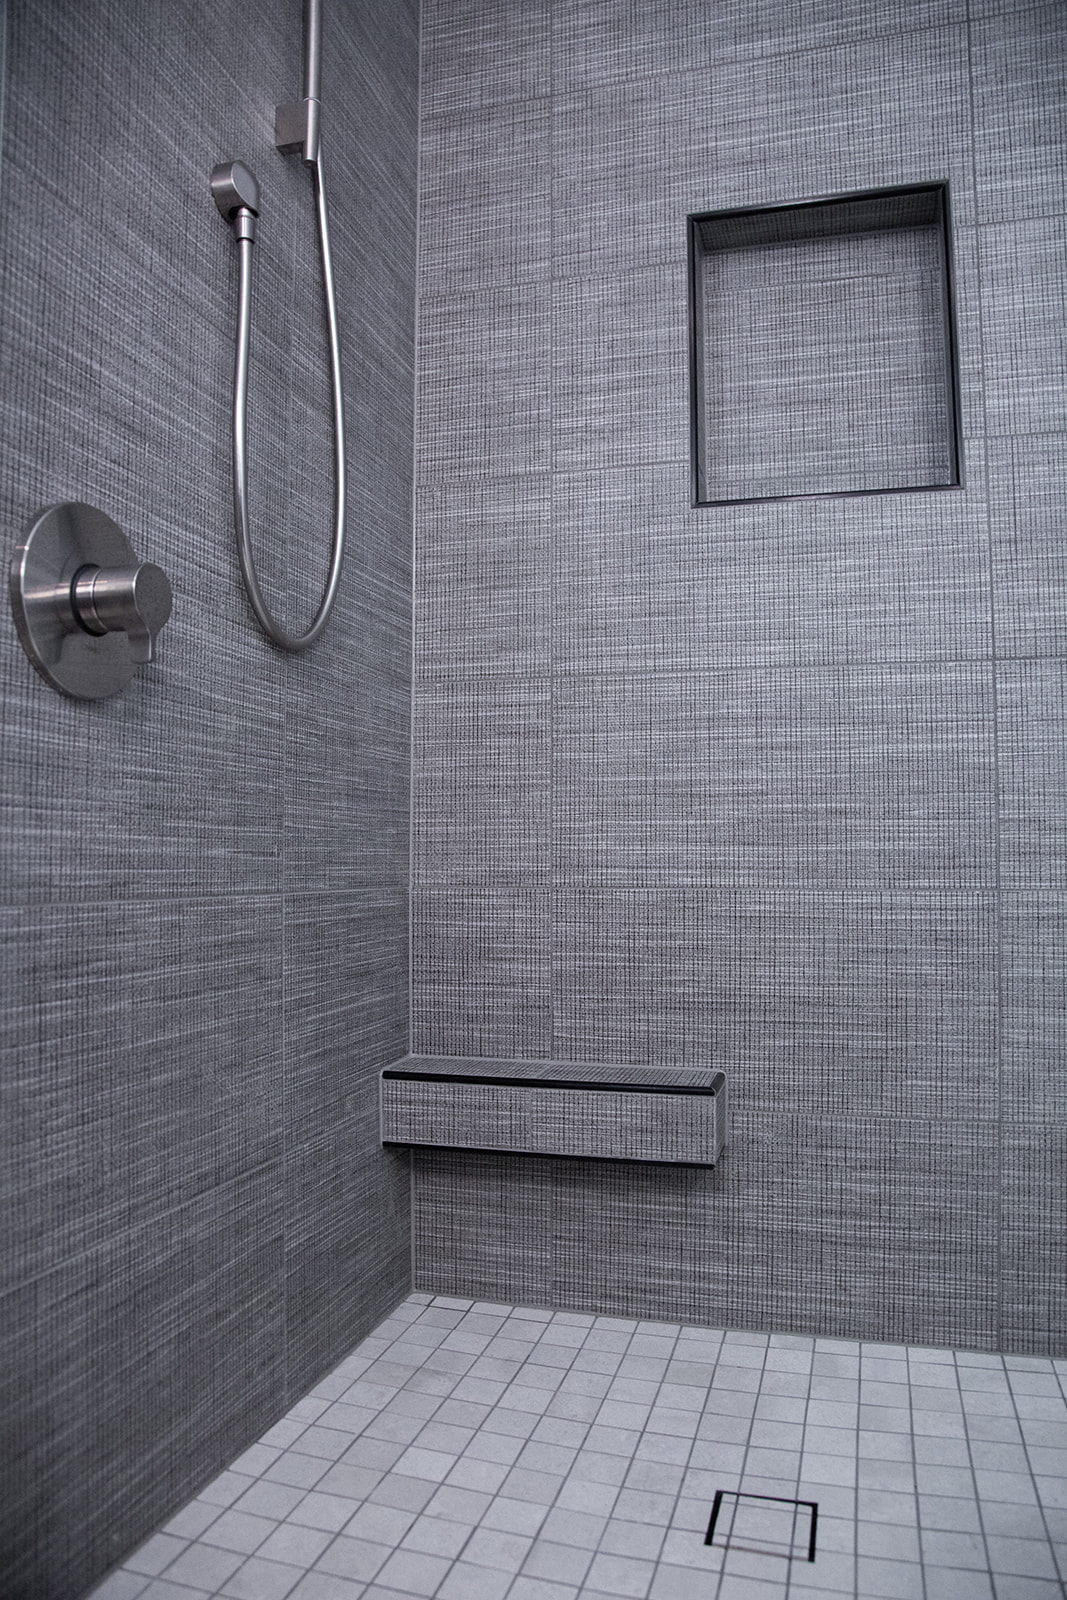 Textured tile shower surround with leg shaving shelf and tile in drain